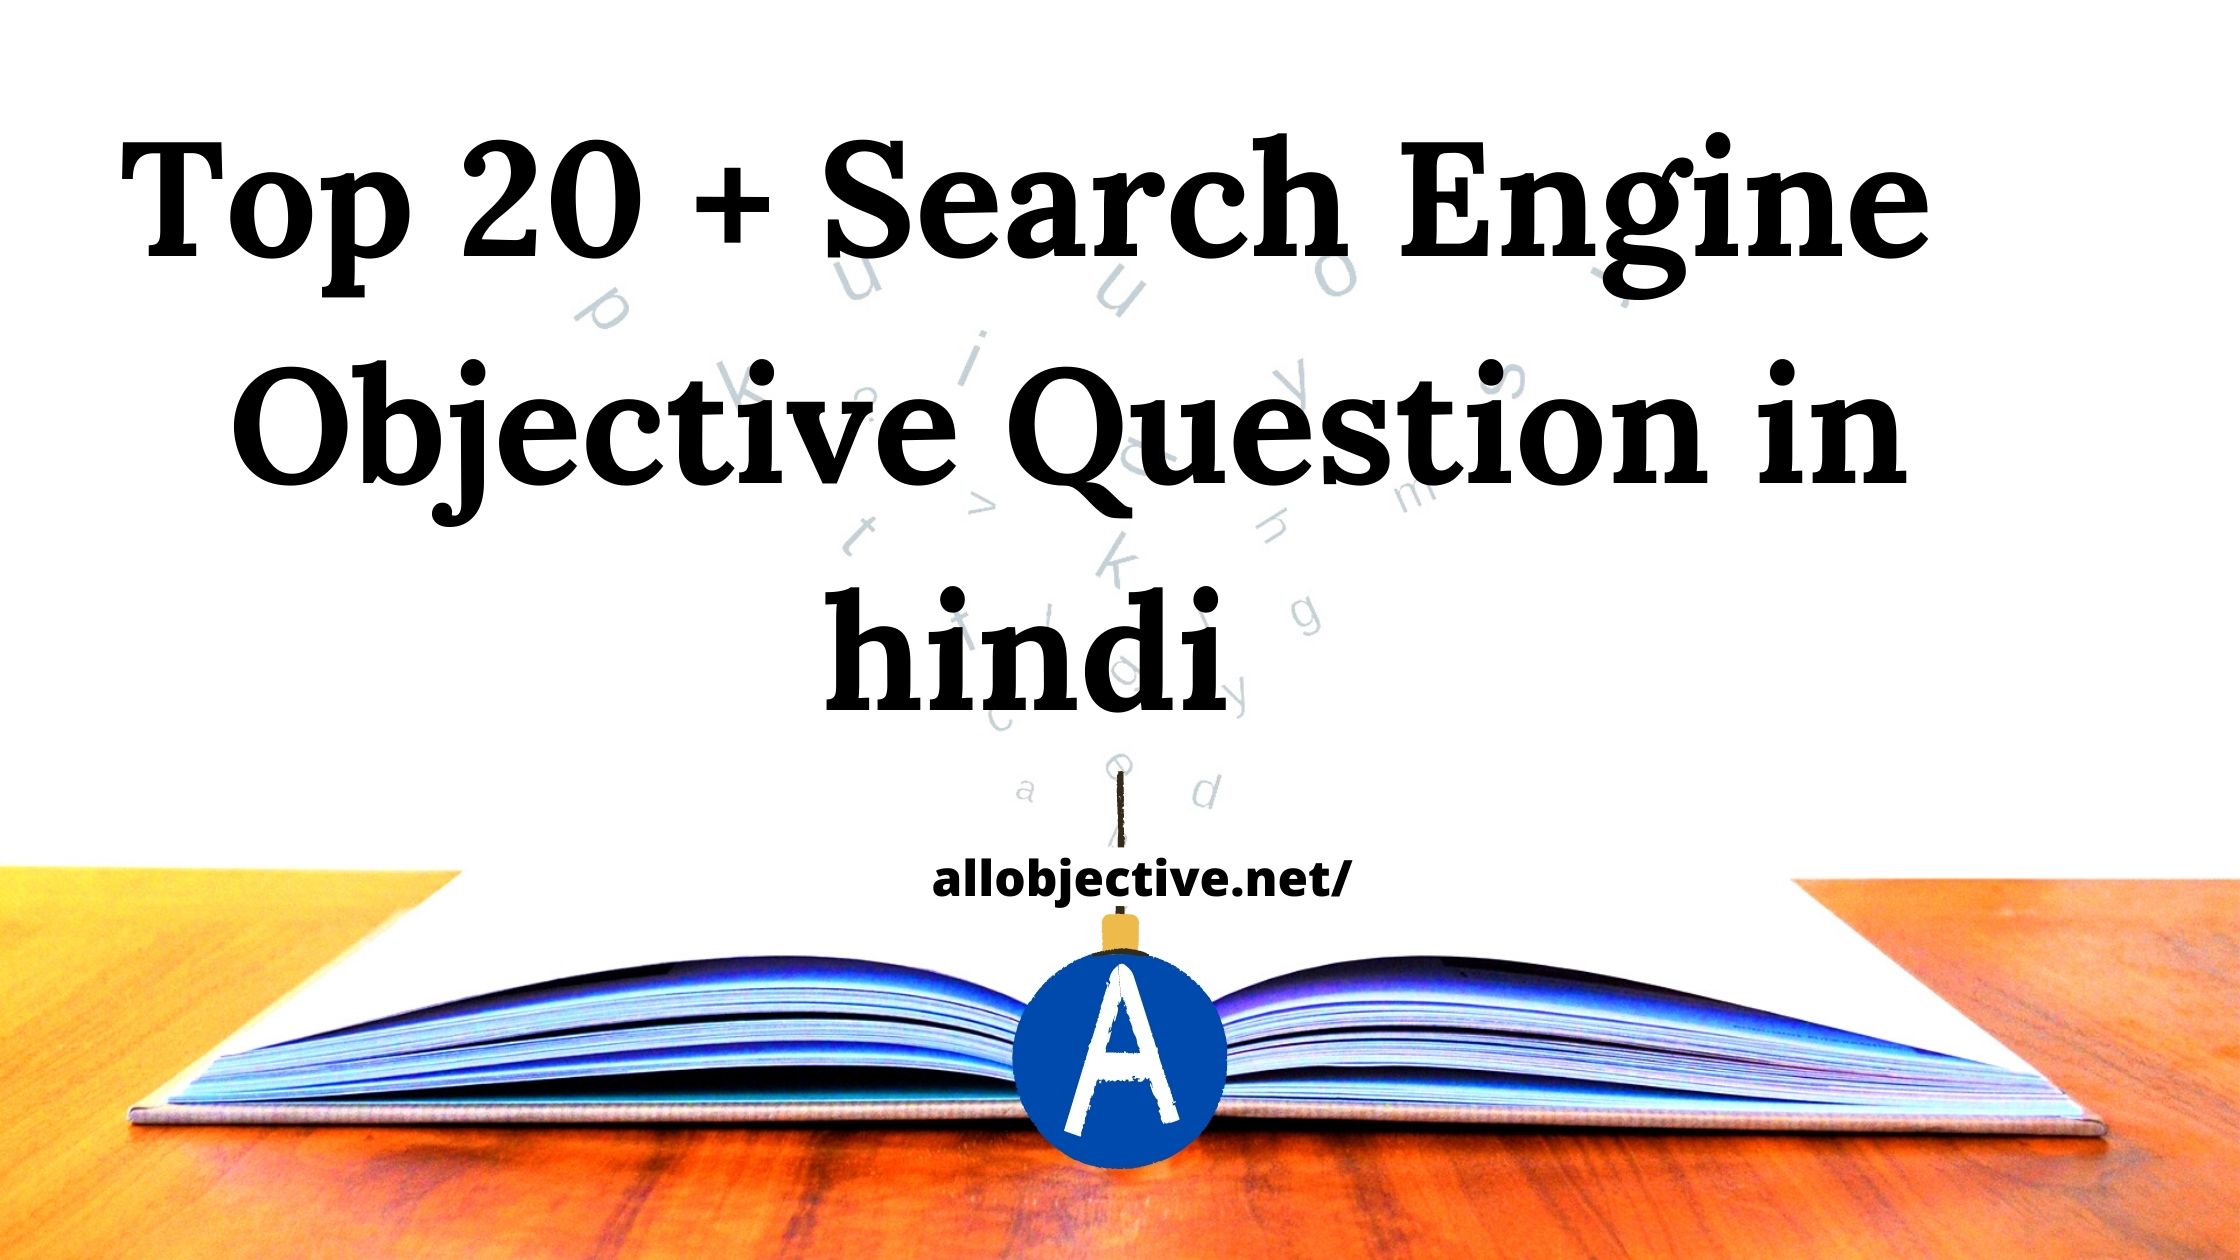 Search Engine Objective Question in hindi  